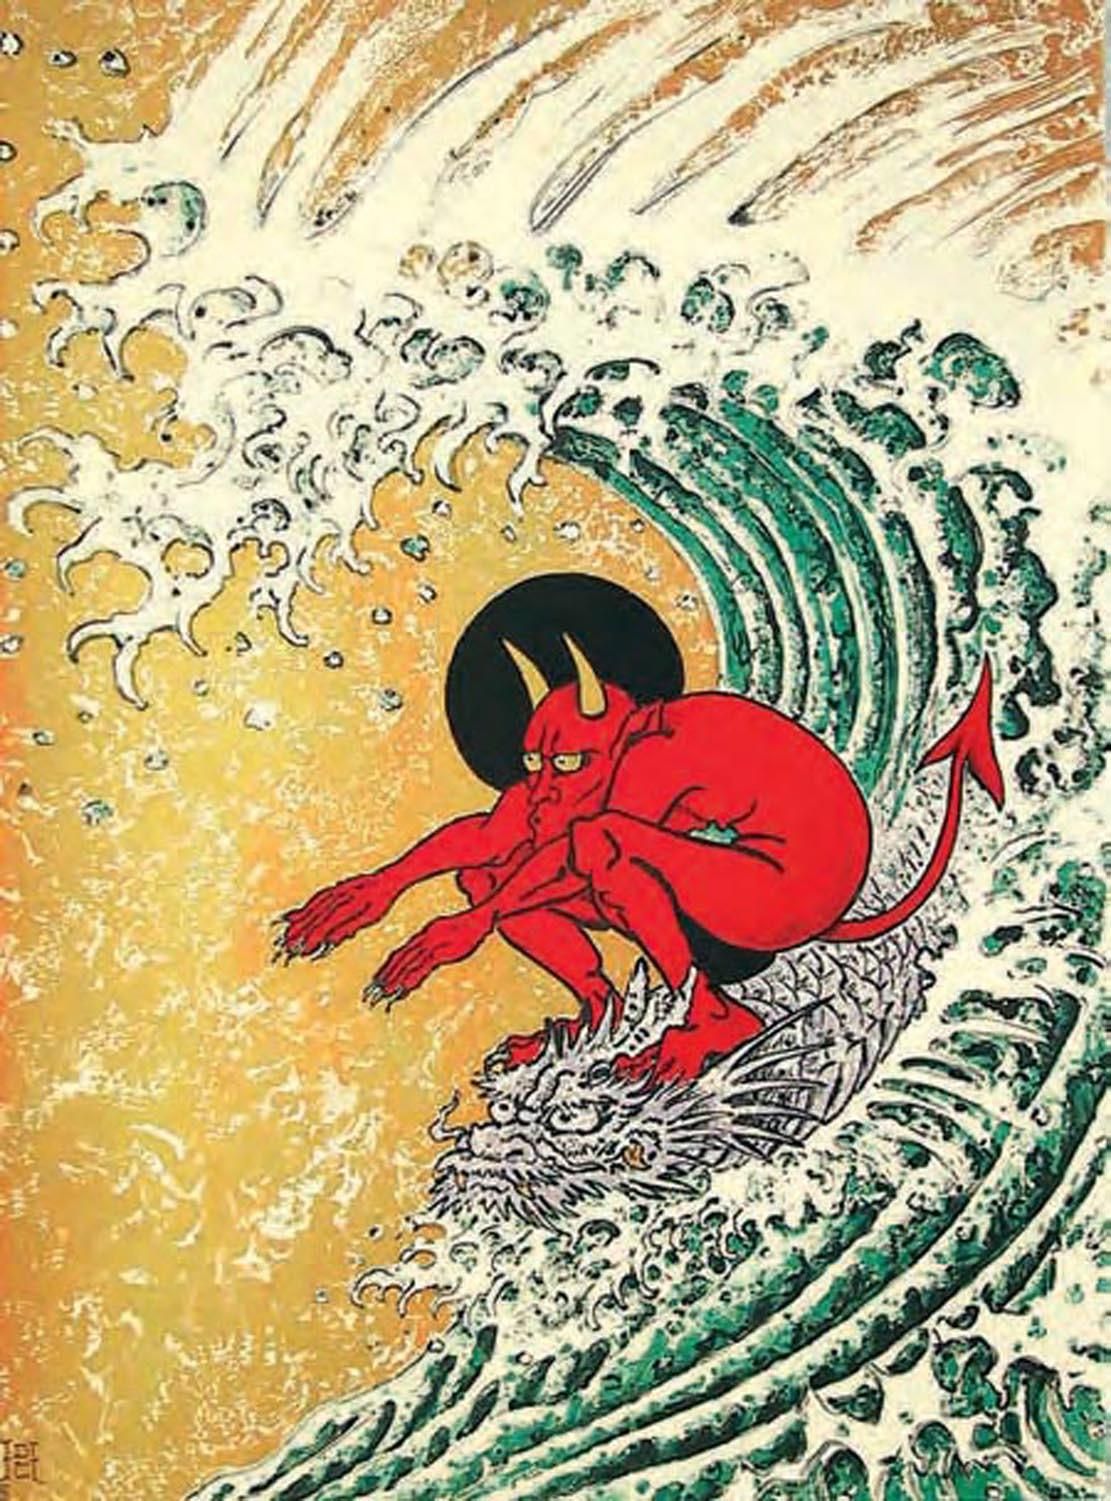 I cant drown my demons. They know how to surf.